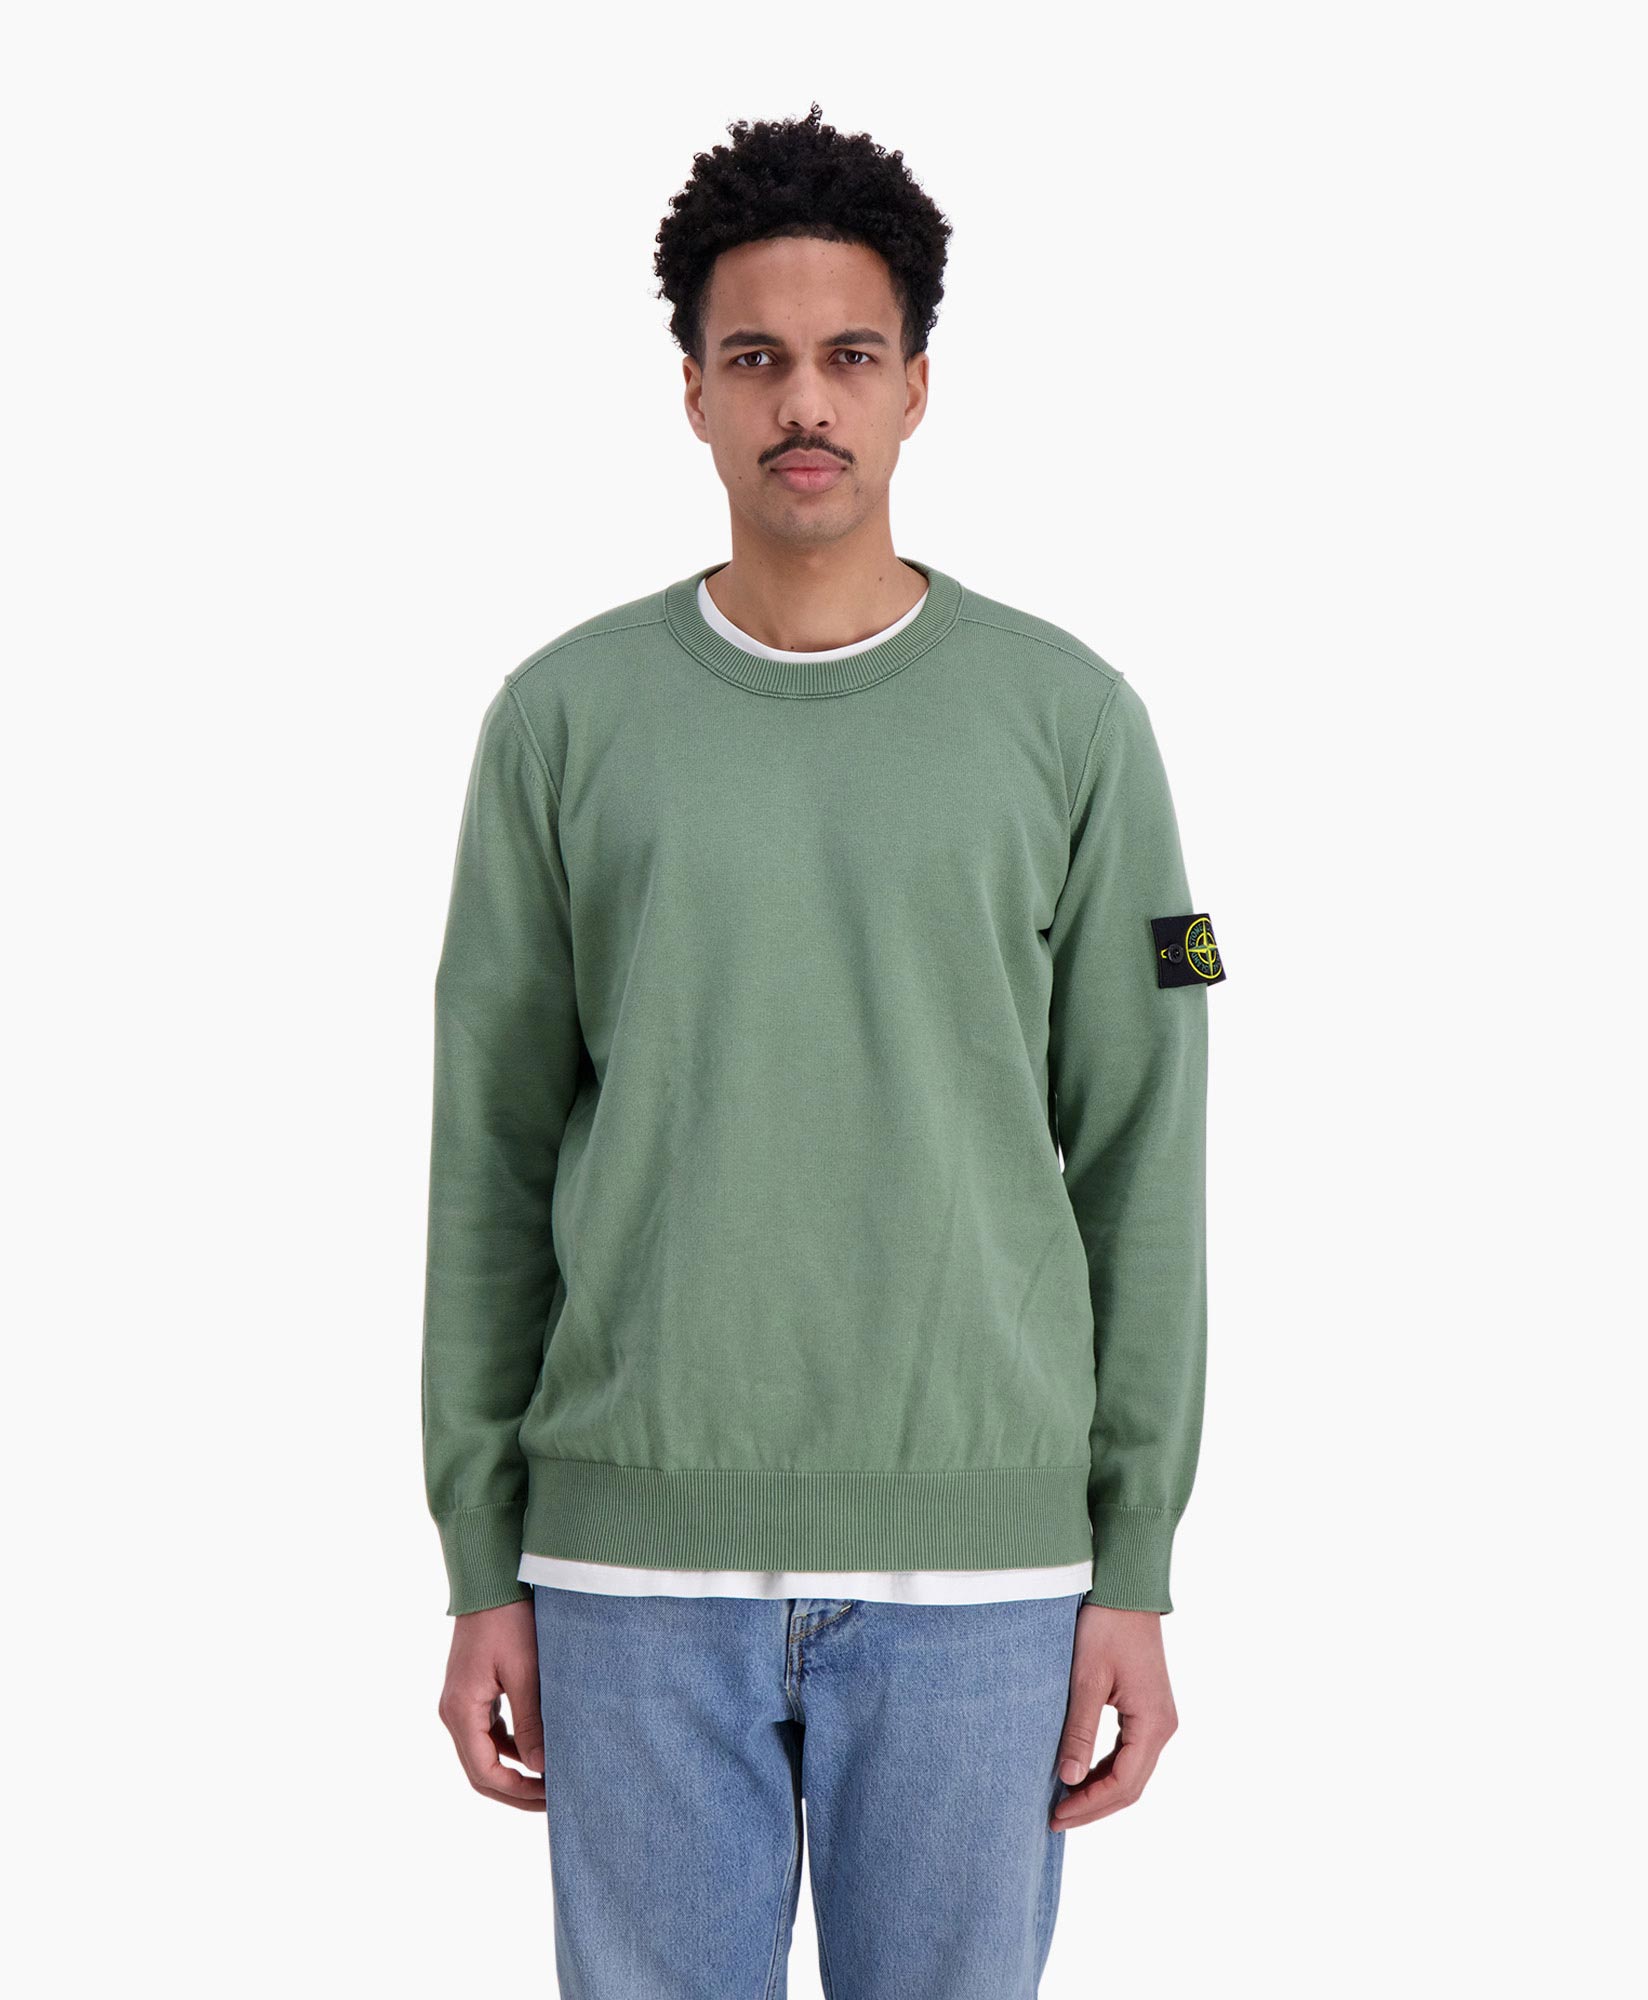 bout moe Levering Stone Island Pullover 0b2.1 licht groen